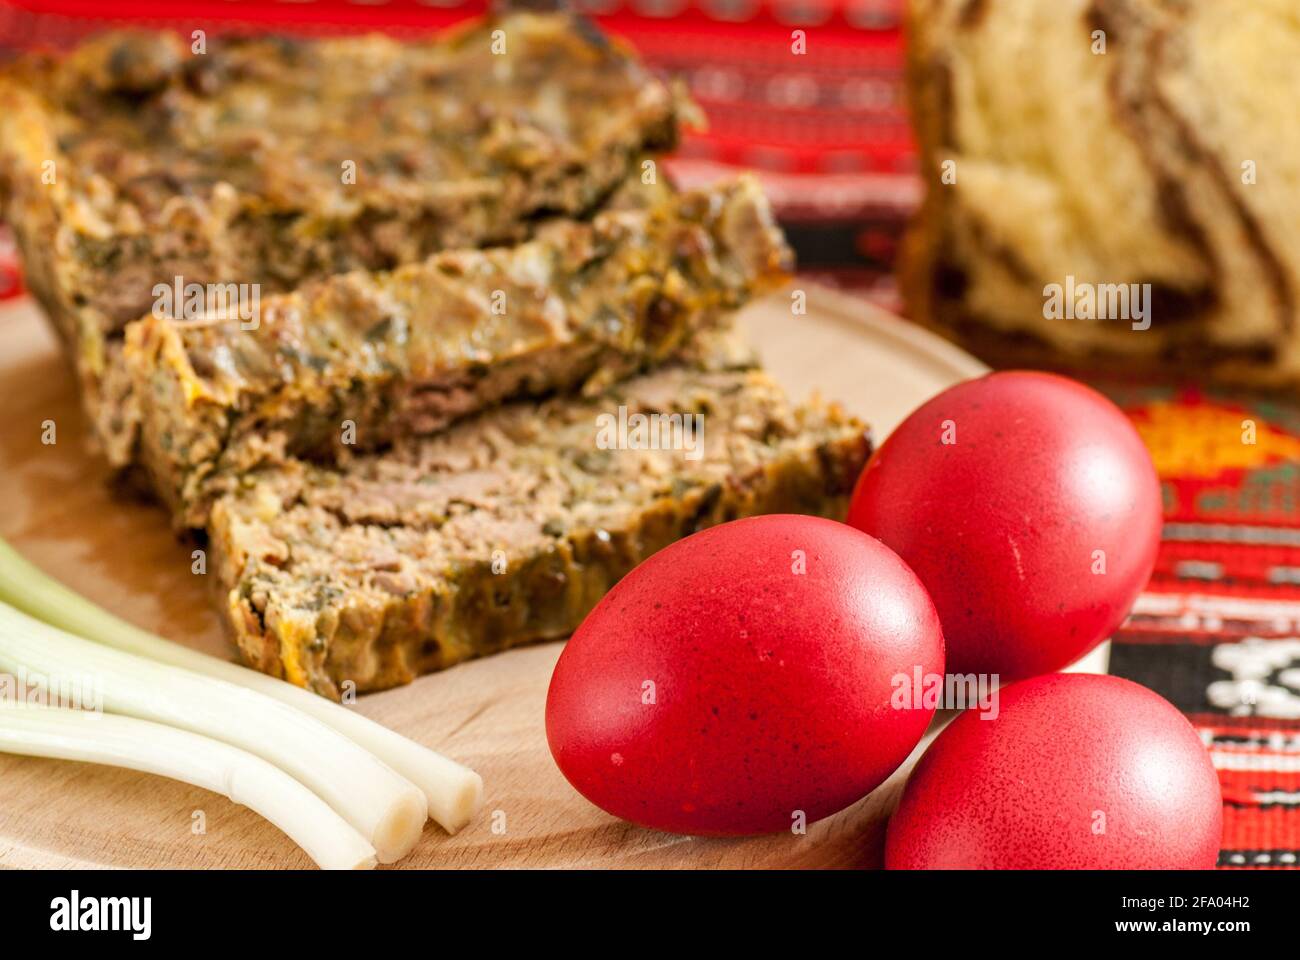 orthodox colored easter eggs with sponge cake aside and Stock Photo